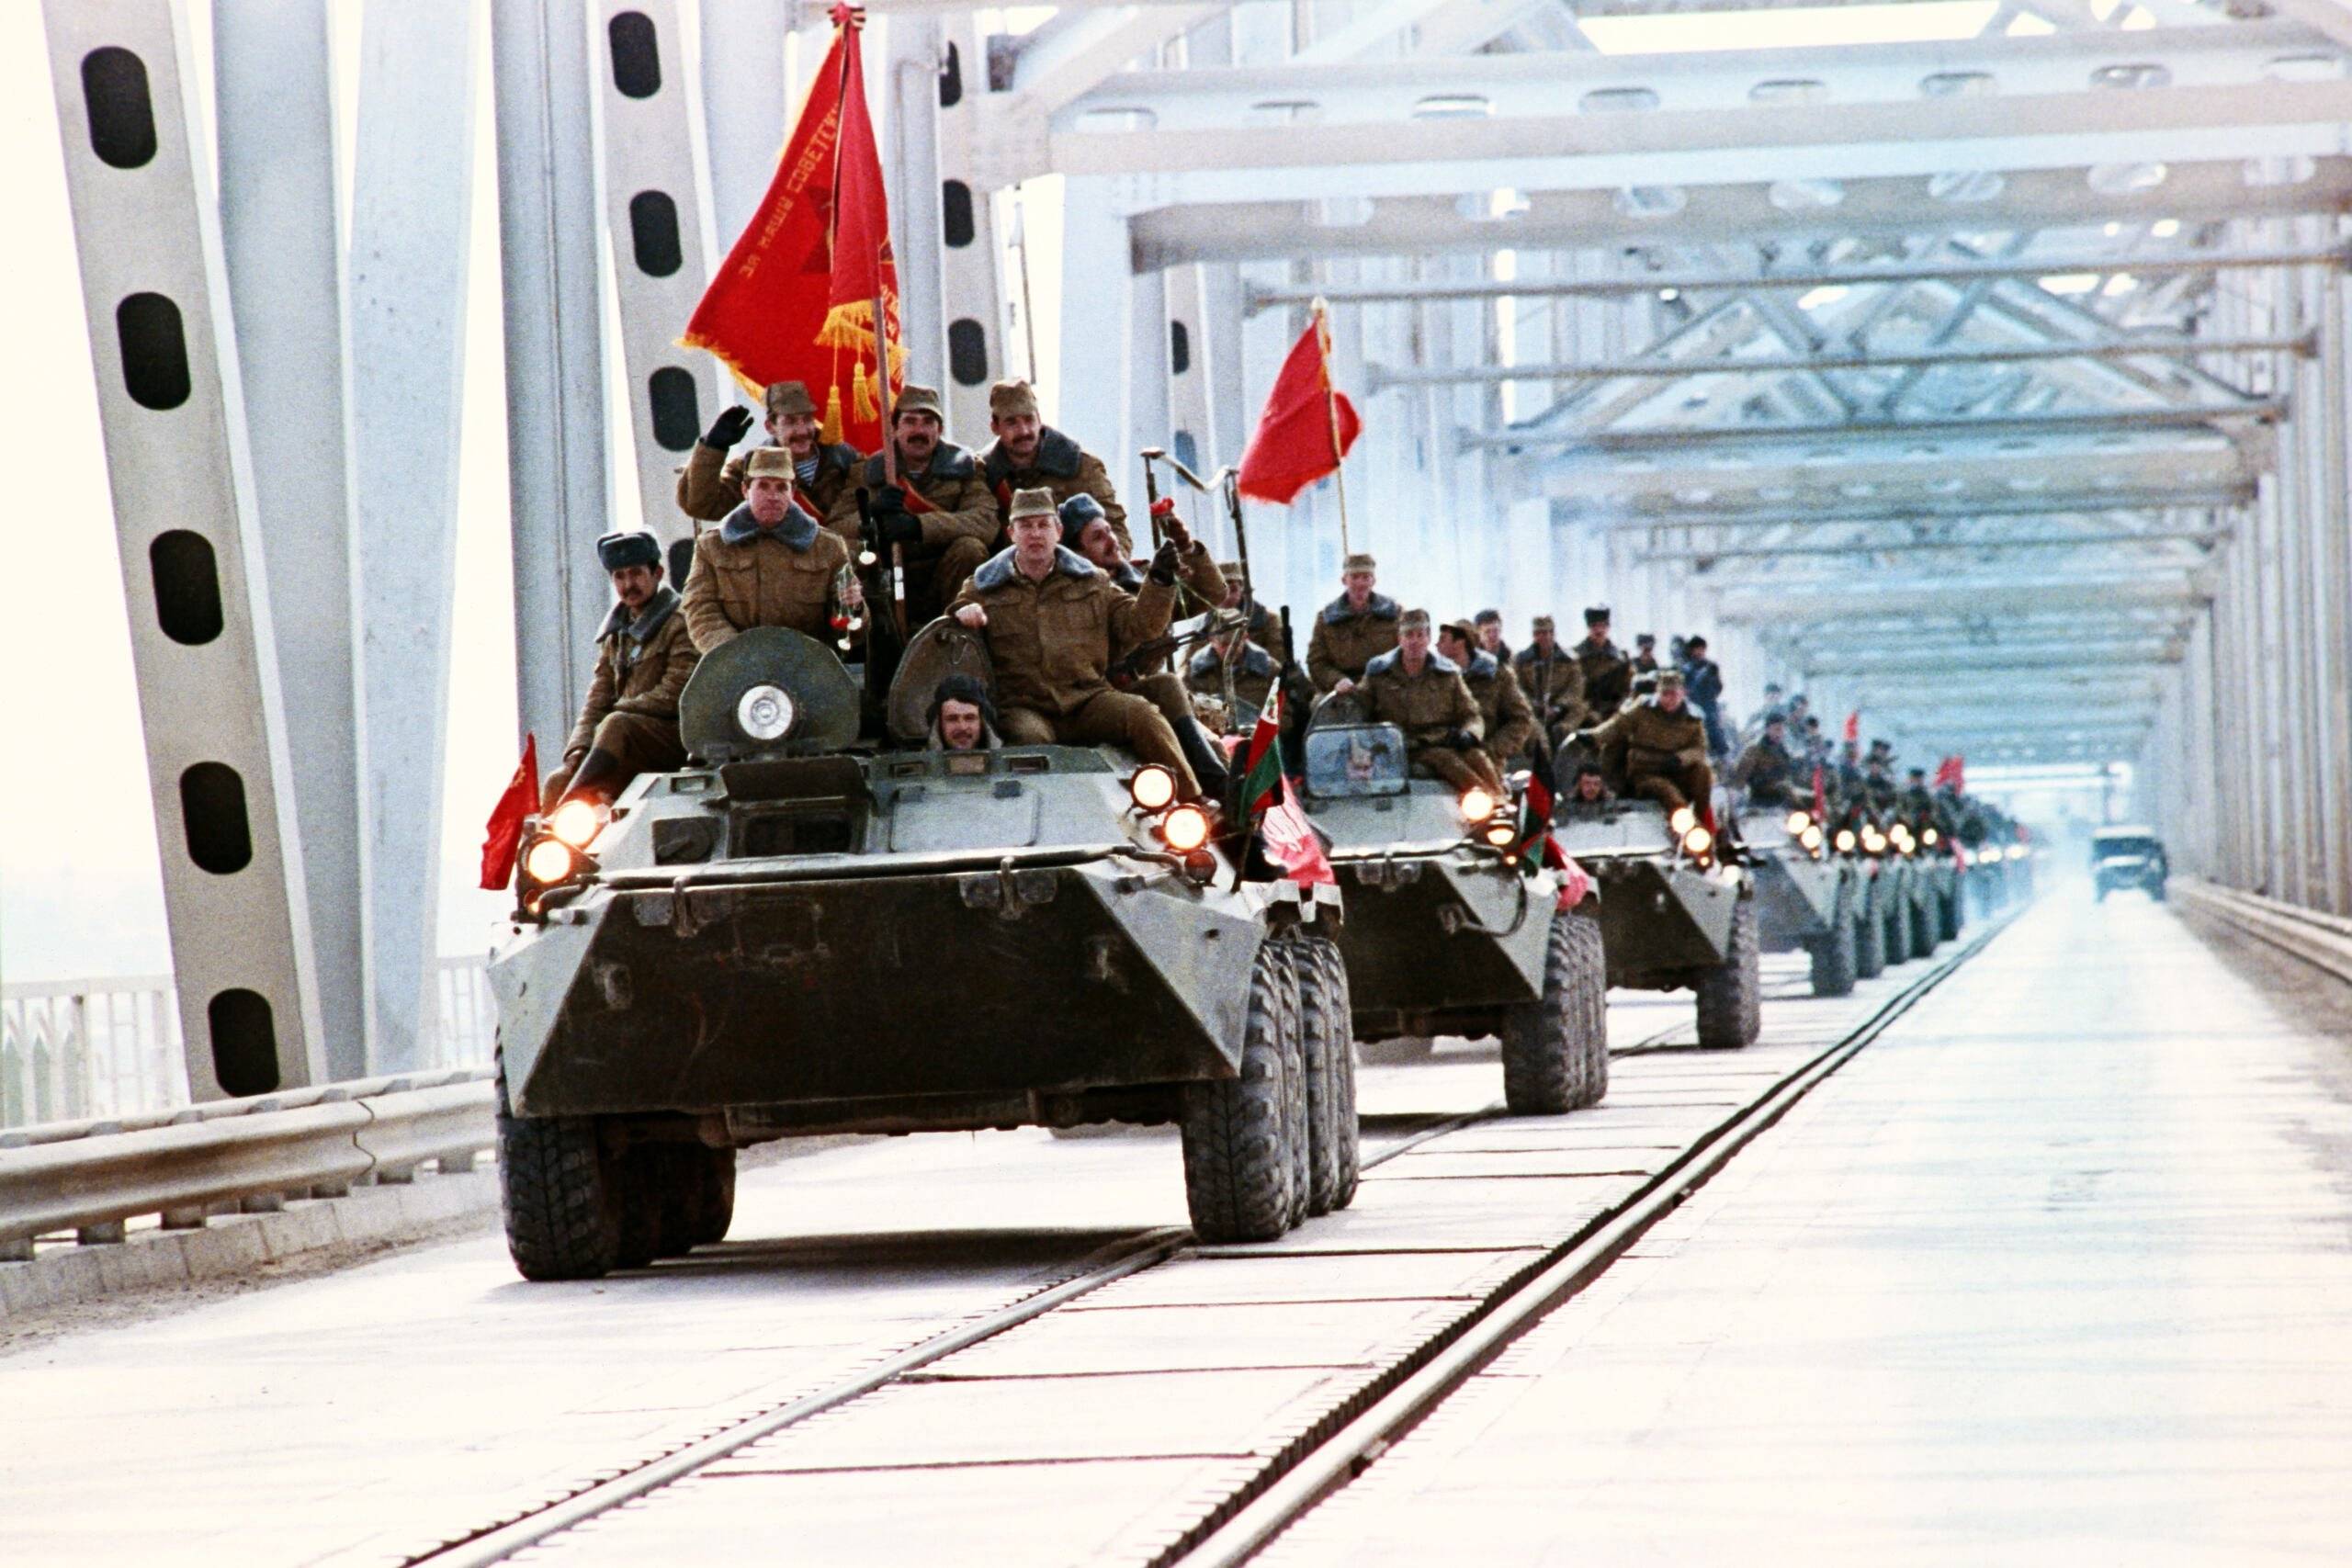 Last Soviet paratrooper regiment moves towards USSR, on February 6, 1989 in Termez, base of Soviet Union military operations in Afghanistan, during the Afghan Civil War, after Soviet withdrawal from Afghanistan. (Photo by Douglas CURRAN / AFP)